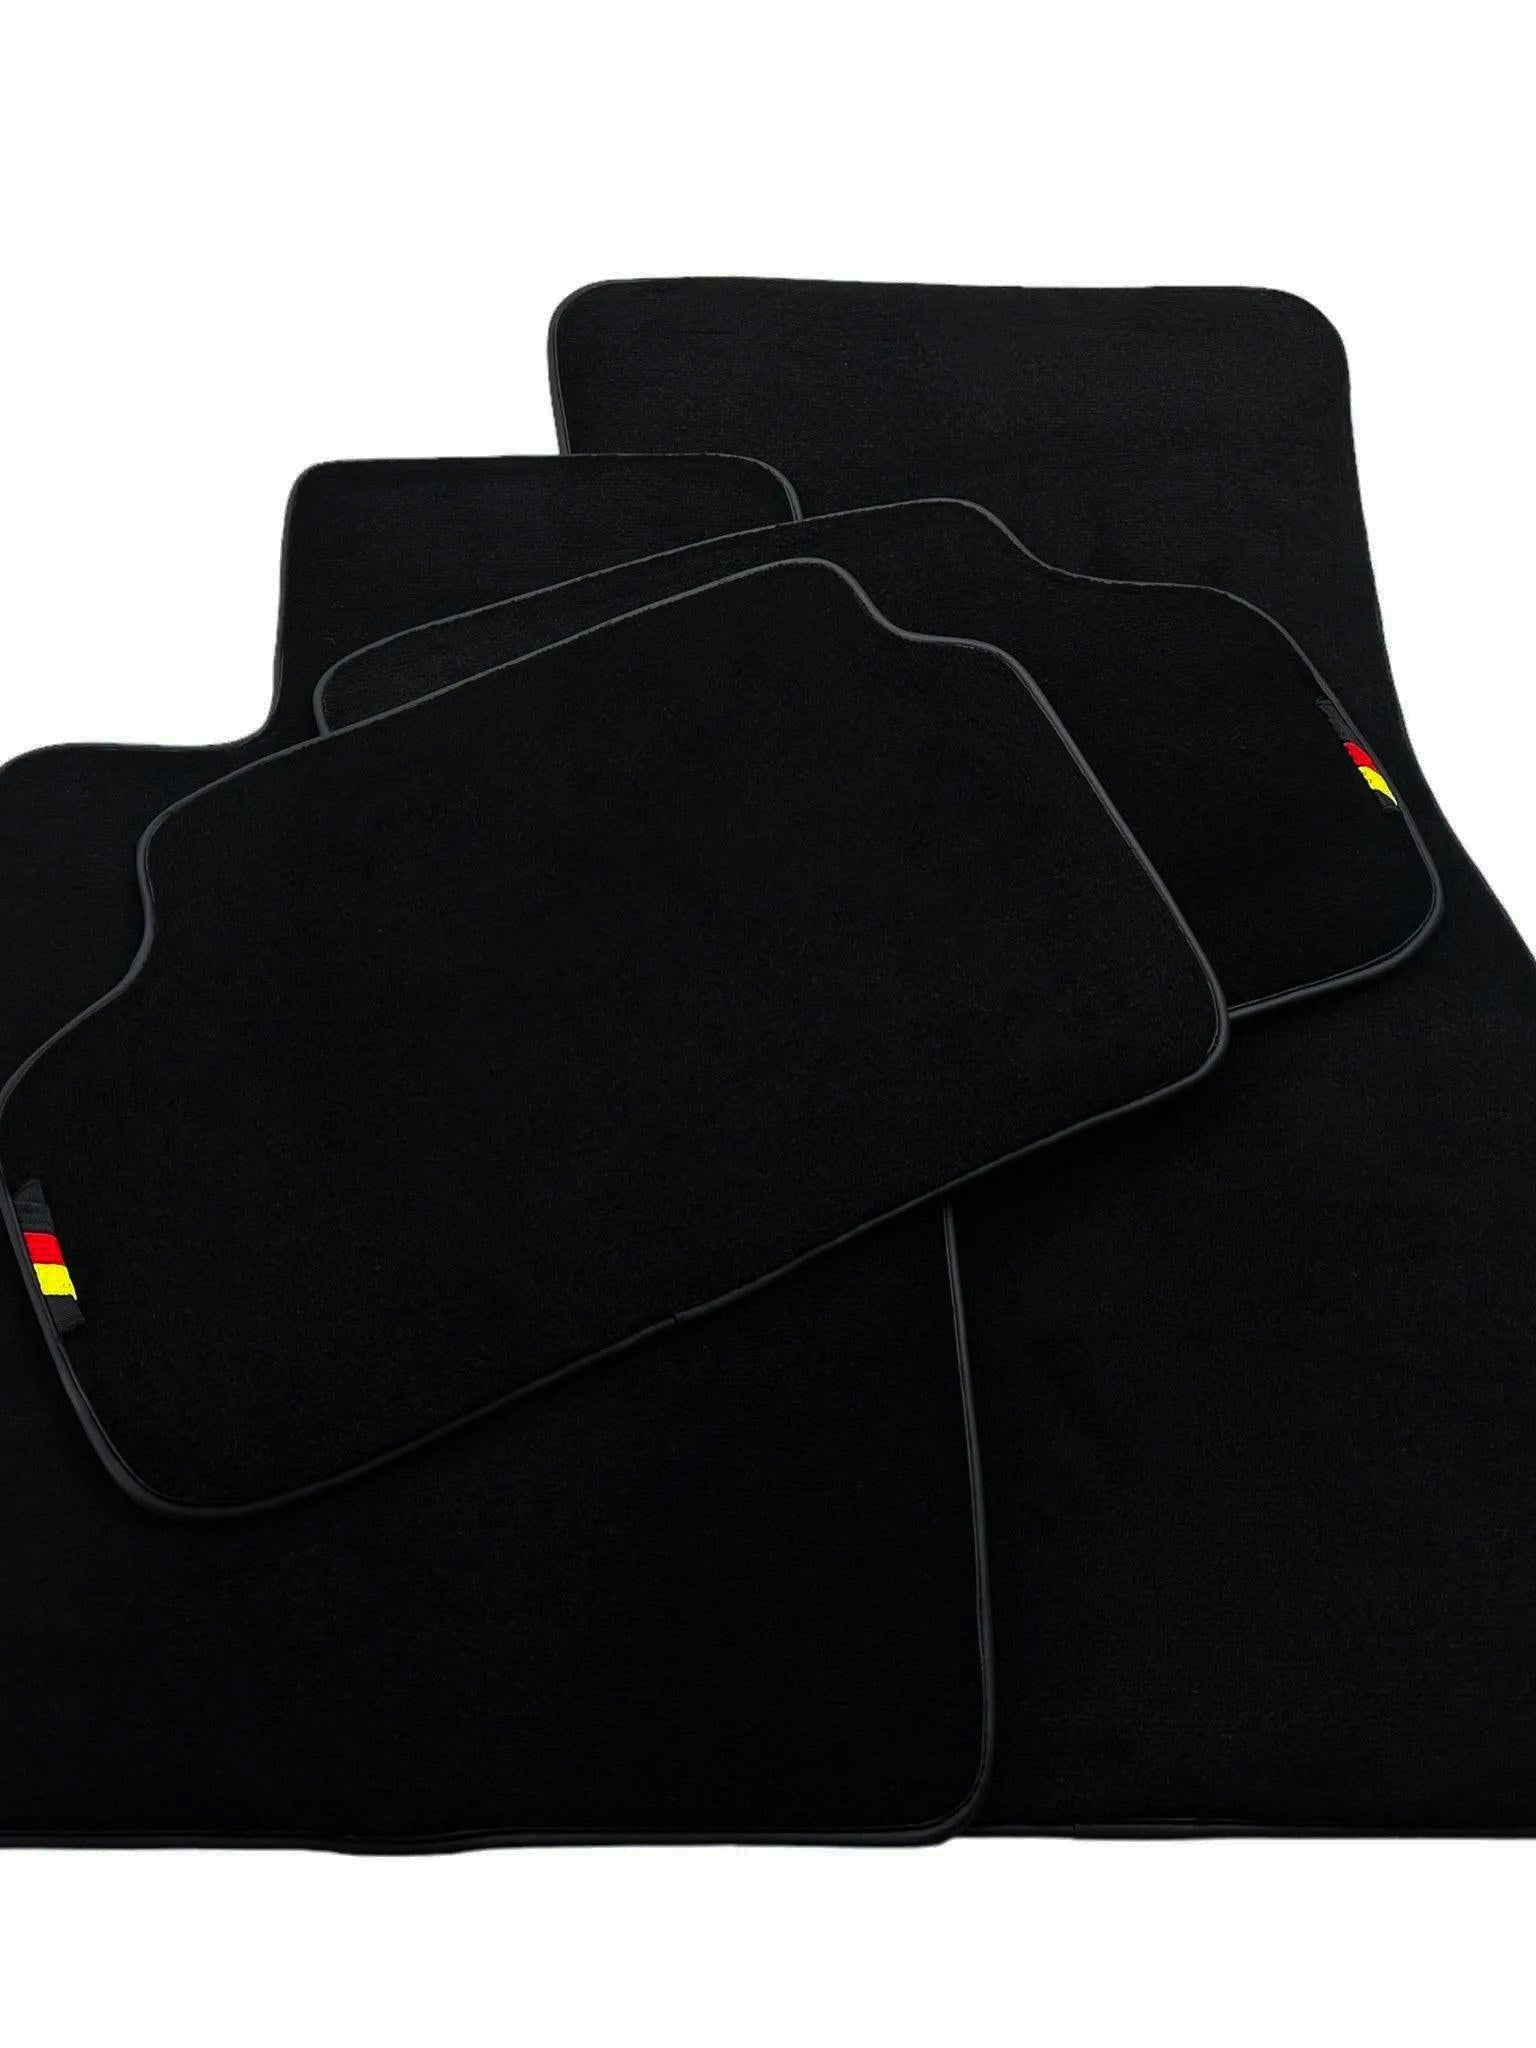 Black Floor Floor Mats For BMW X1 Series E84 Germany Edition - AutoWin